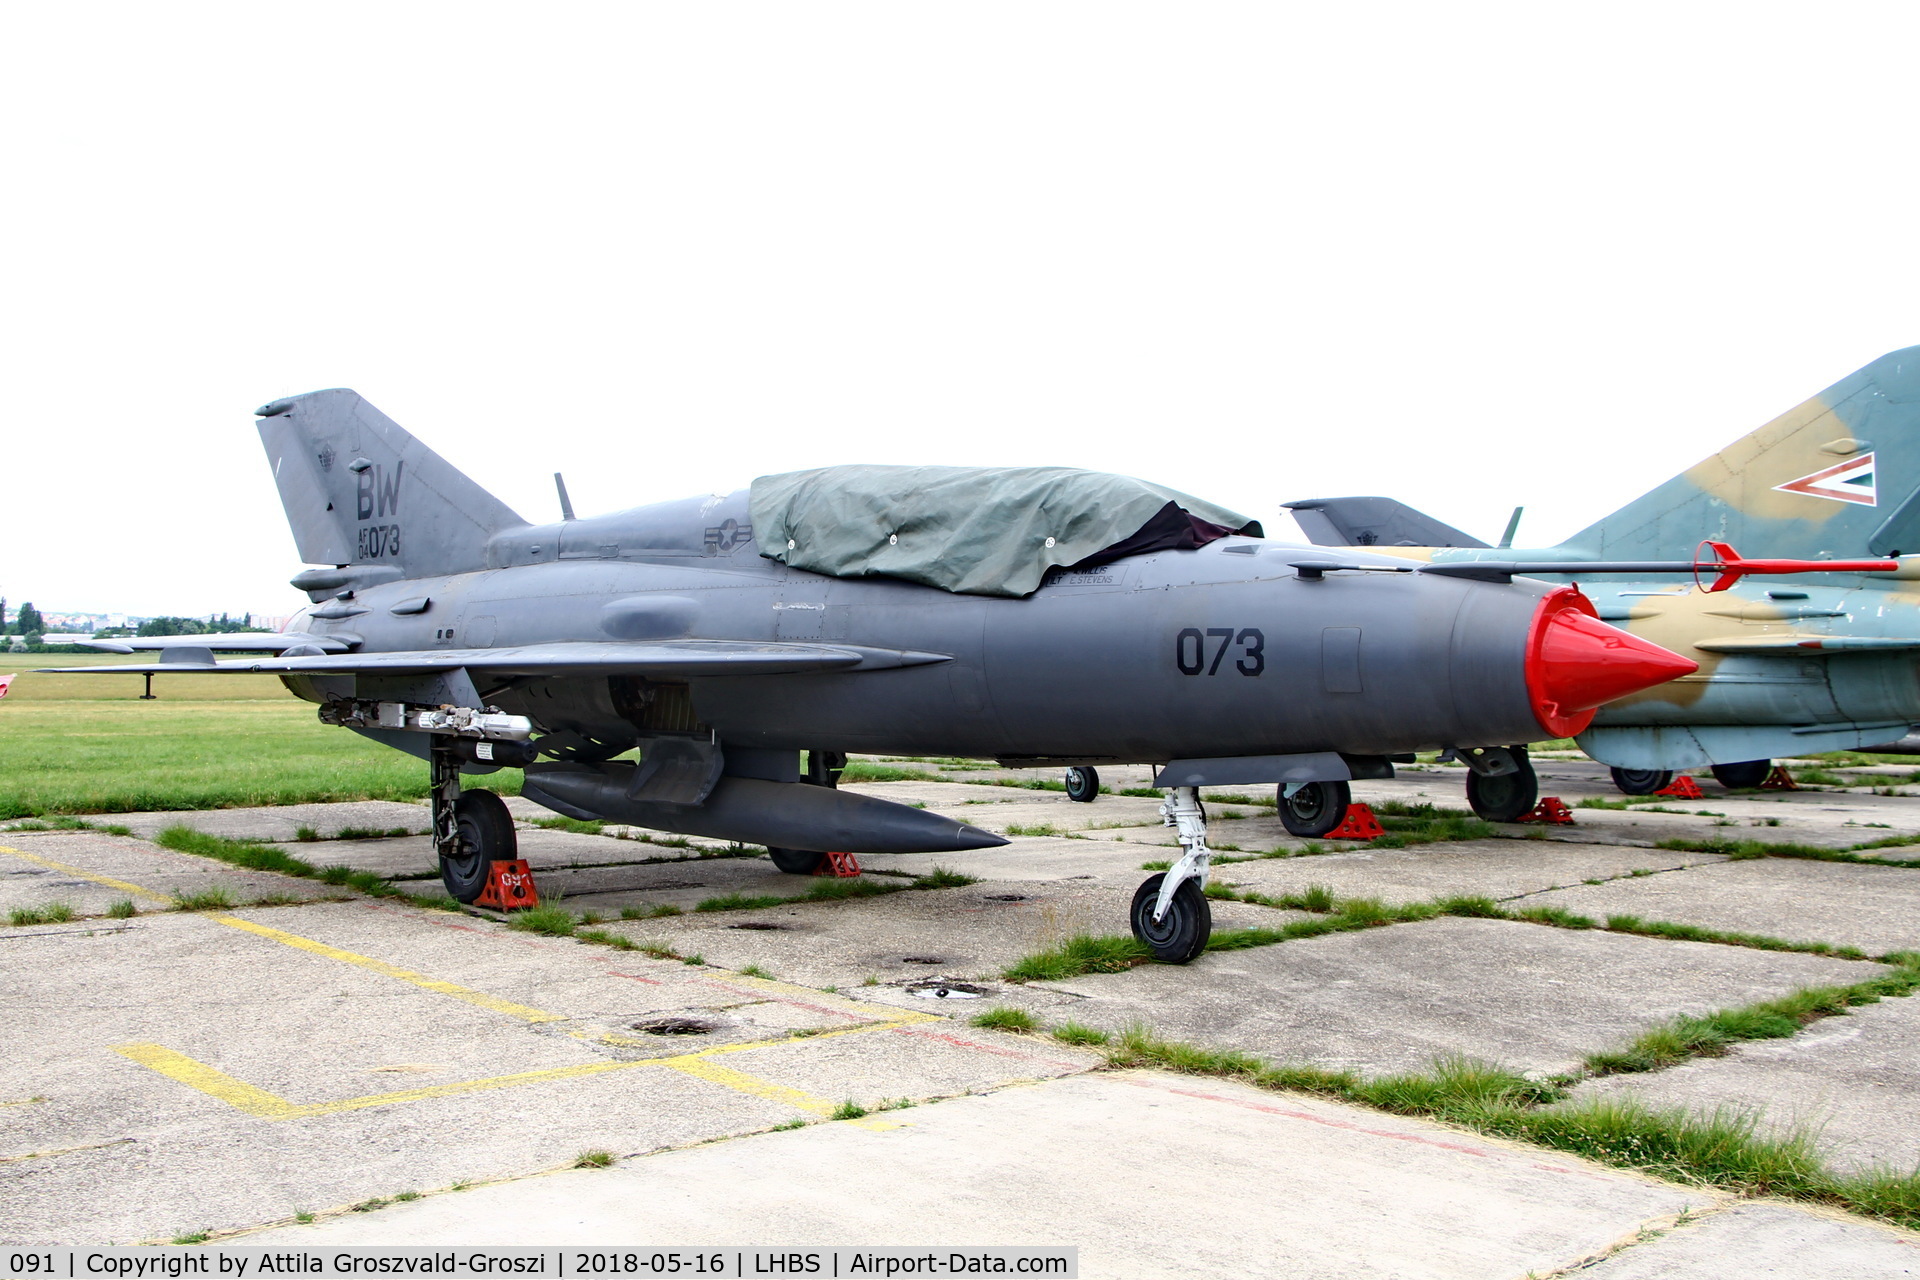 091, Mikoyan-Gurevich MiG-21UM C/N 516955091, LHBS Budaörs Airport, Hungary. 2014 was painted gray and BW AF04073 page number for filming.